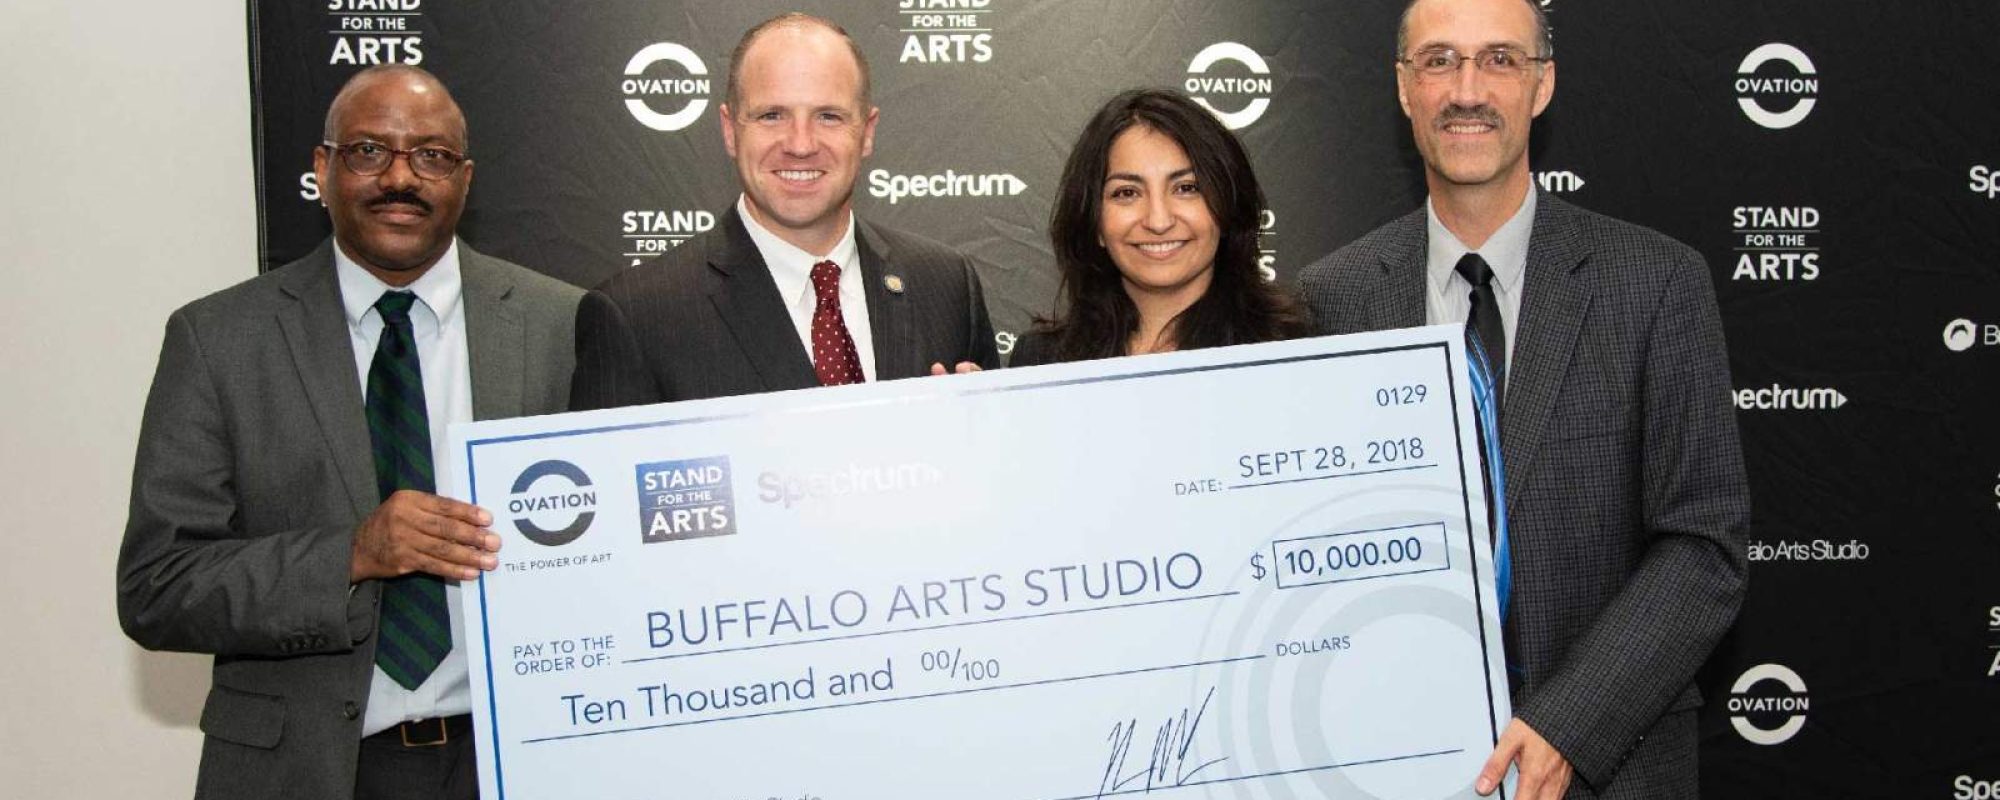 OVATION AND SPECTRUM ANNOUNCE BUFFALO ARTS STUDIO  AS STAND FOR THE ARTS AWARD RECIPIENT